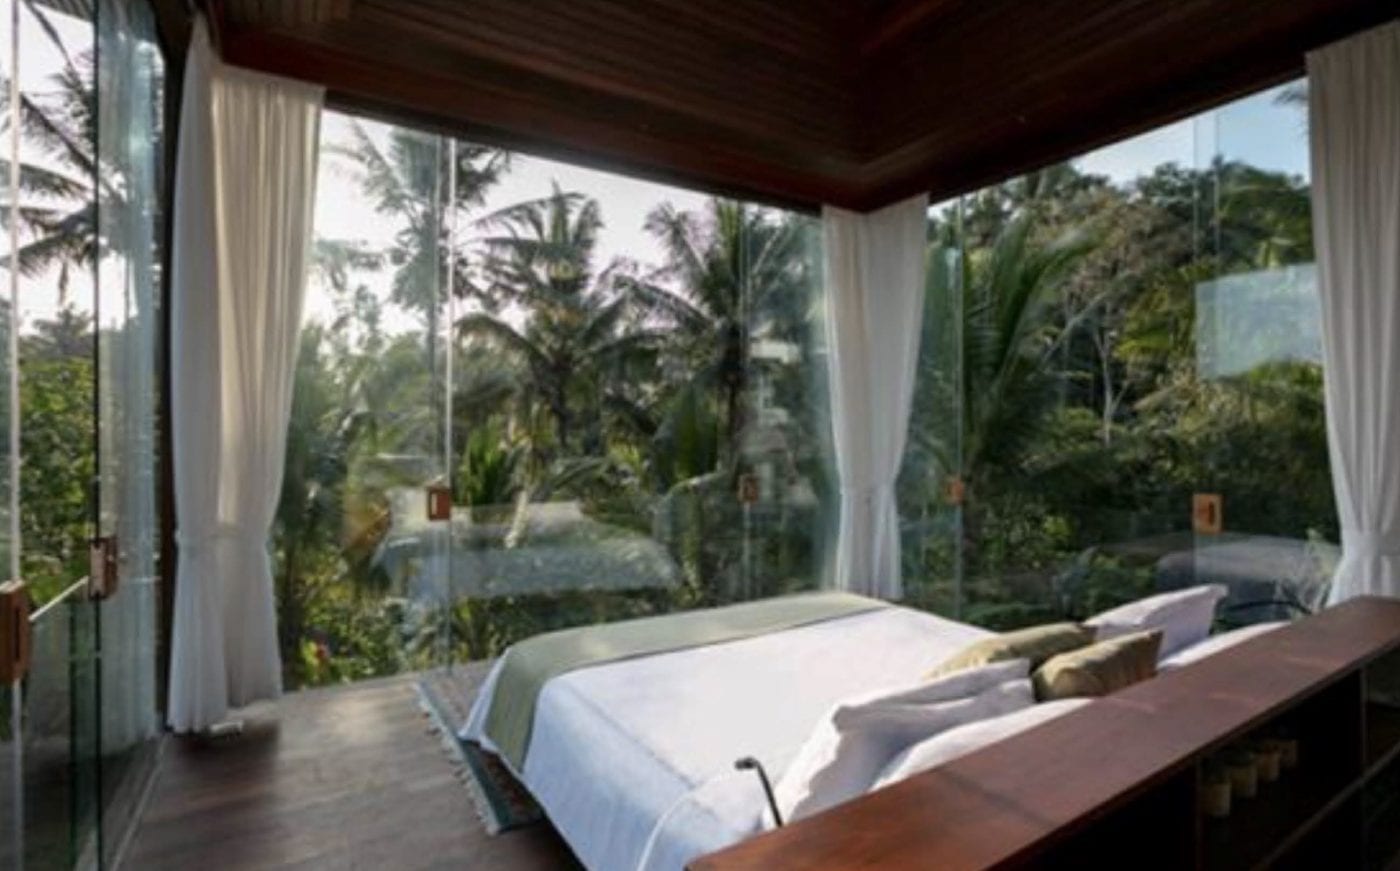 Bliss Sanctuary for Women offers unlimited spa treatments and jungle view rooms